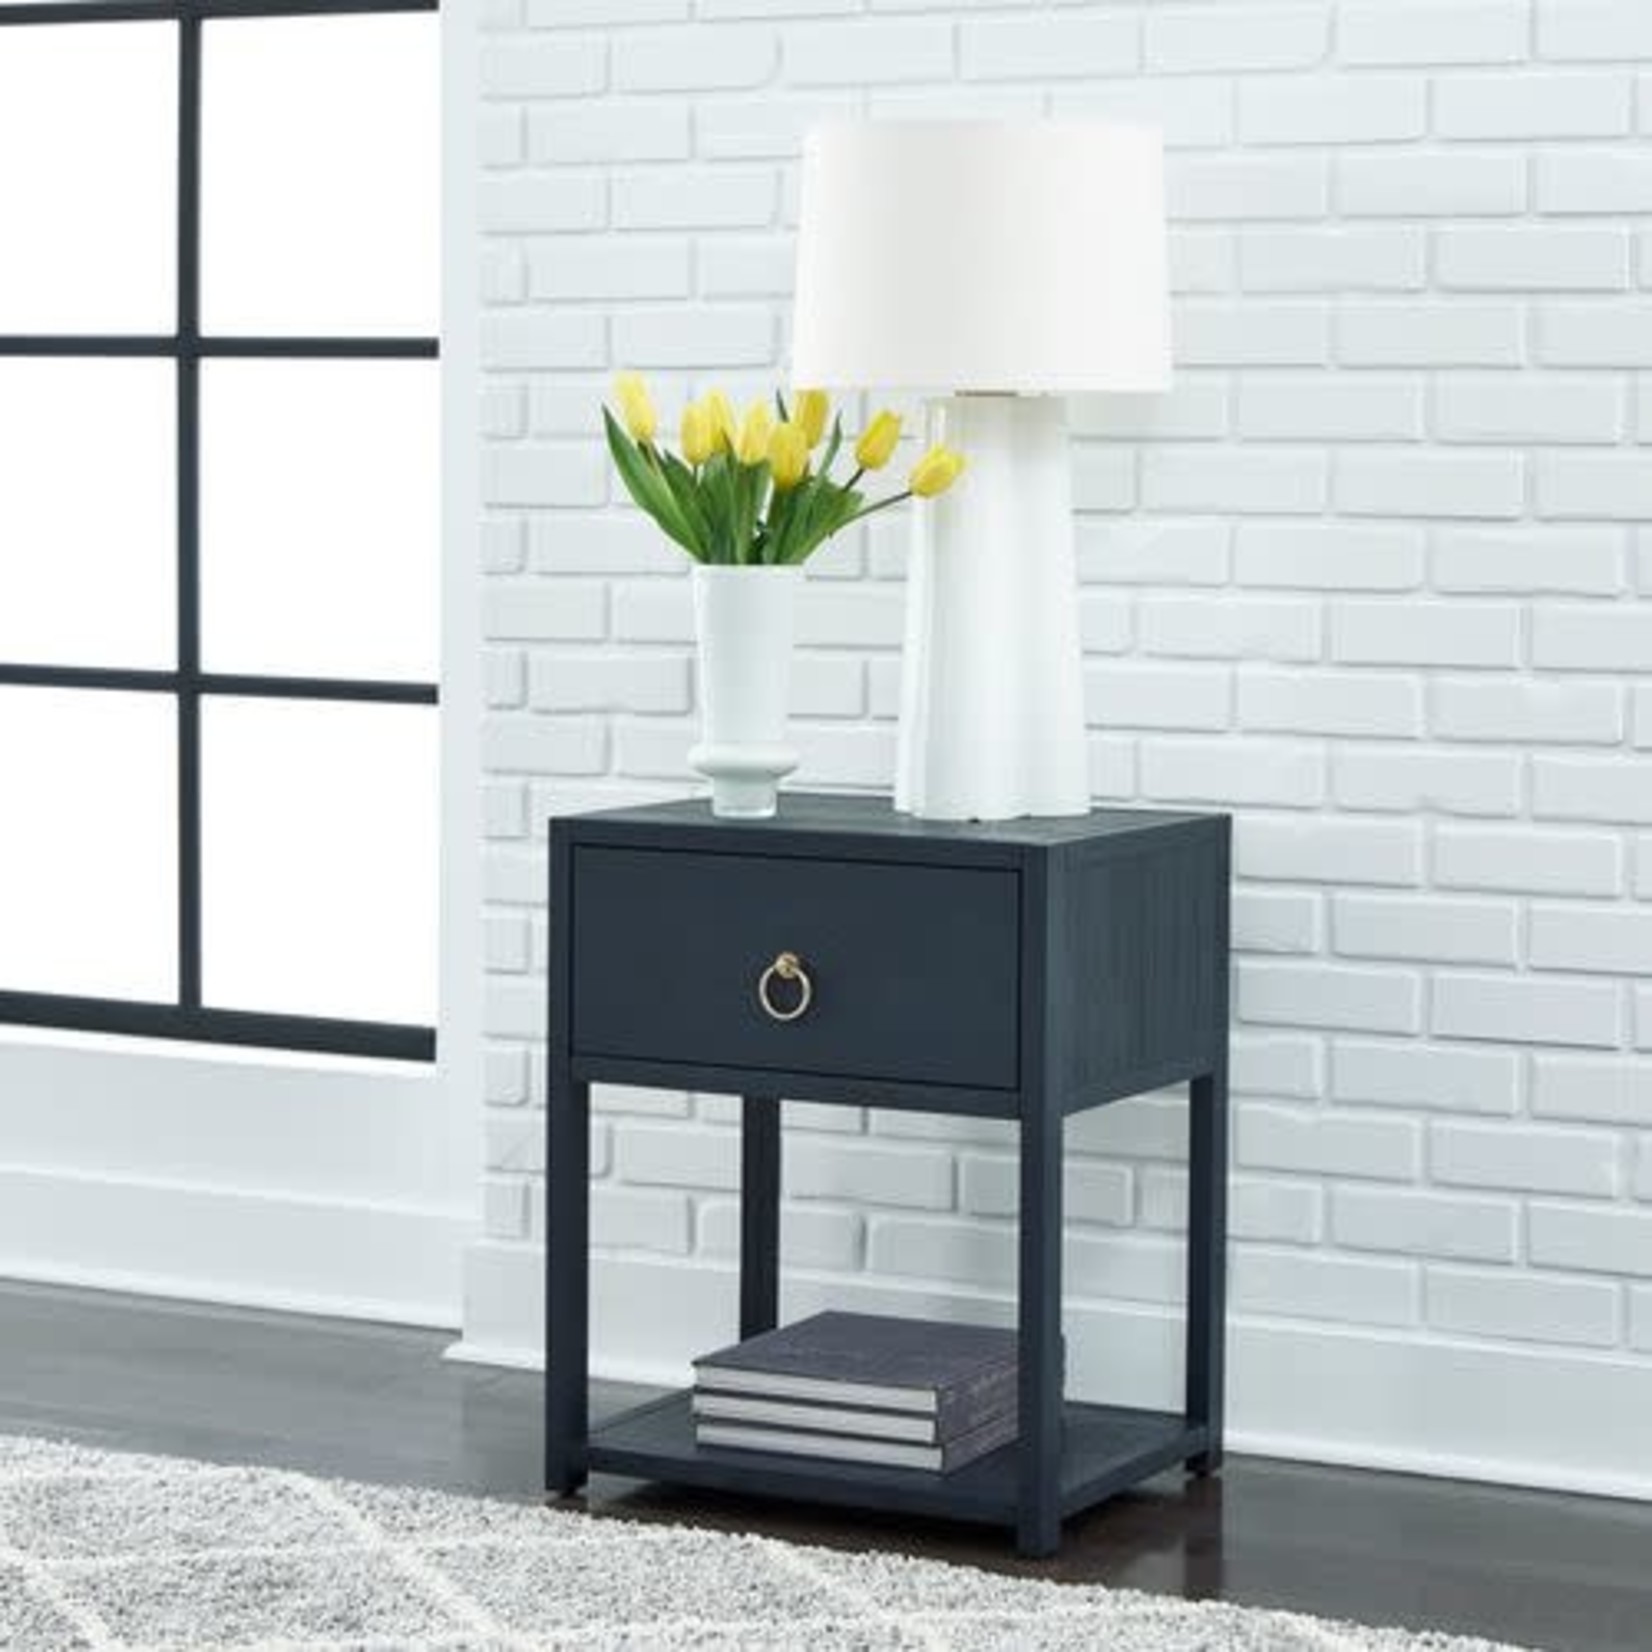 Liberty Furniture Midnight 1 Shelf Accent Table